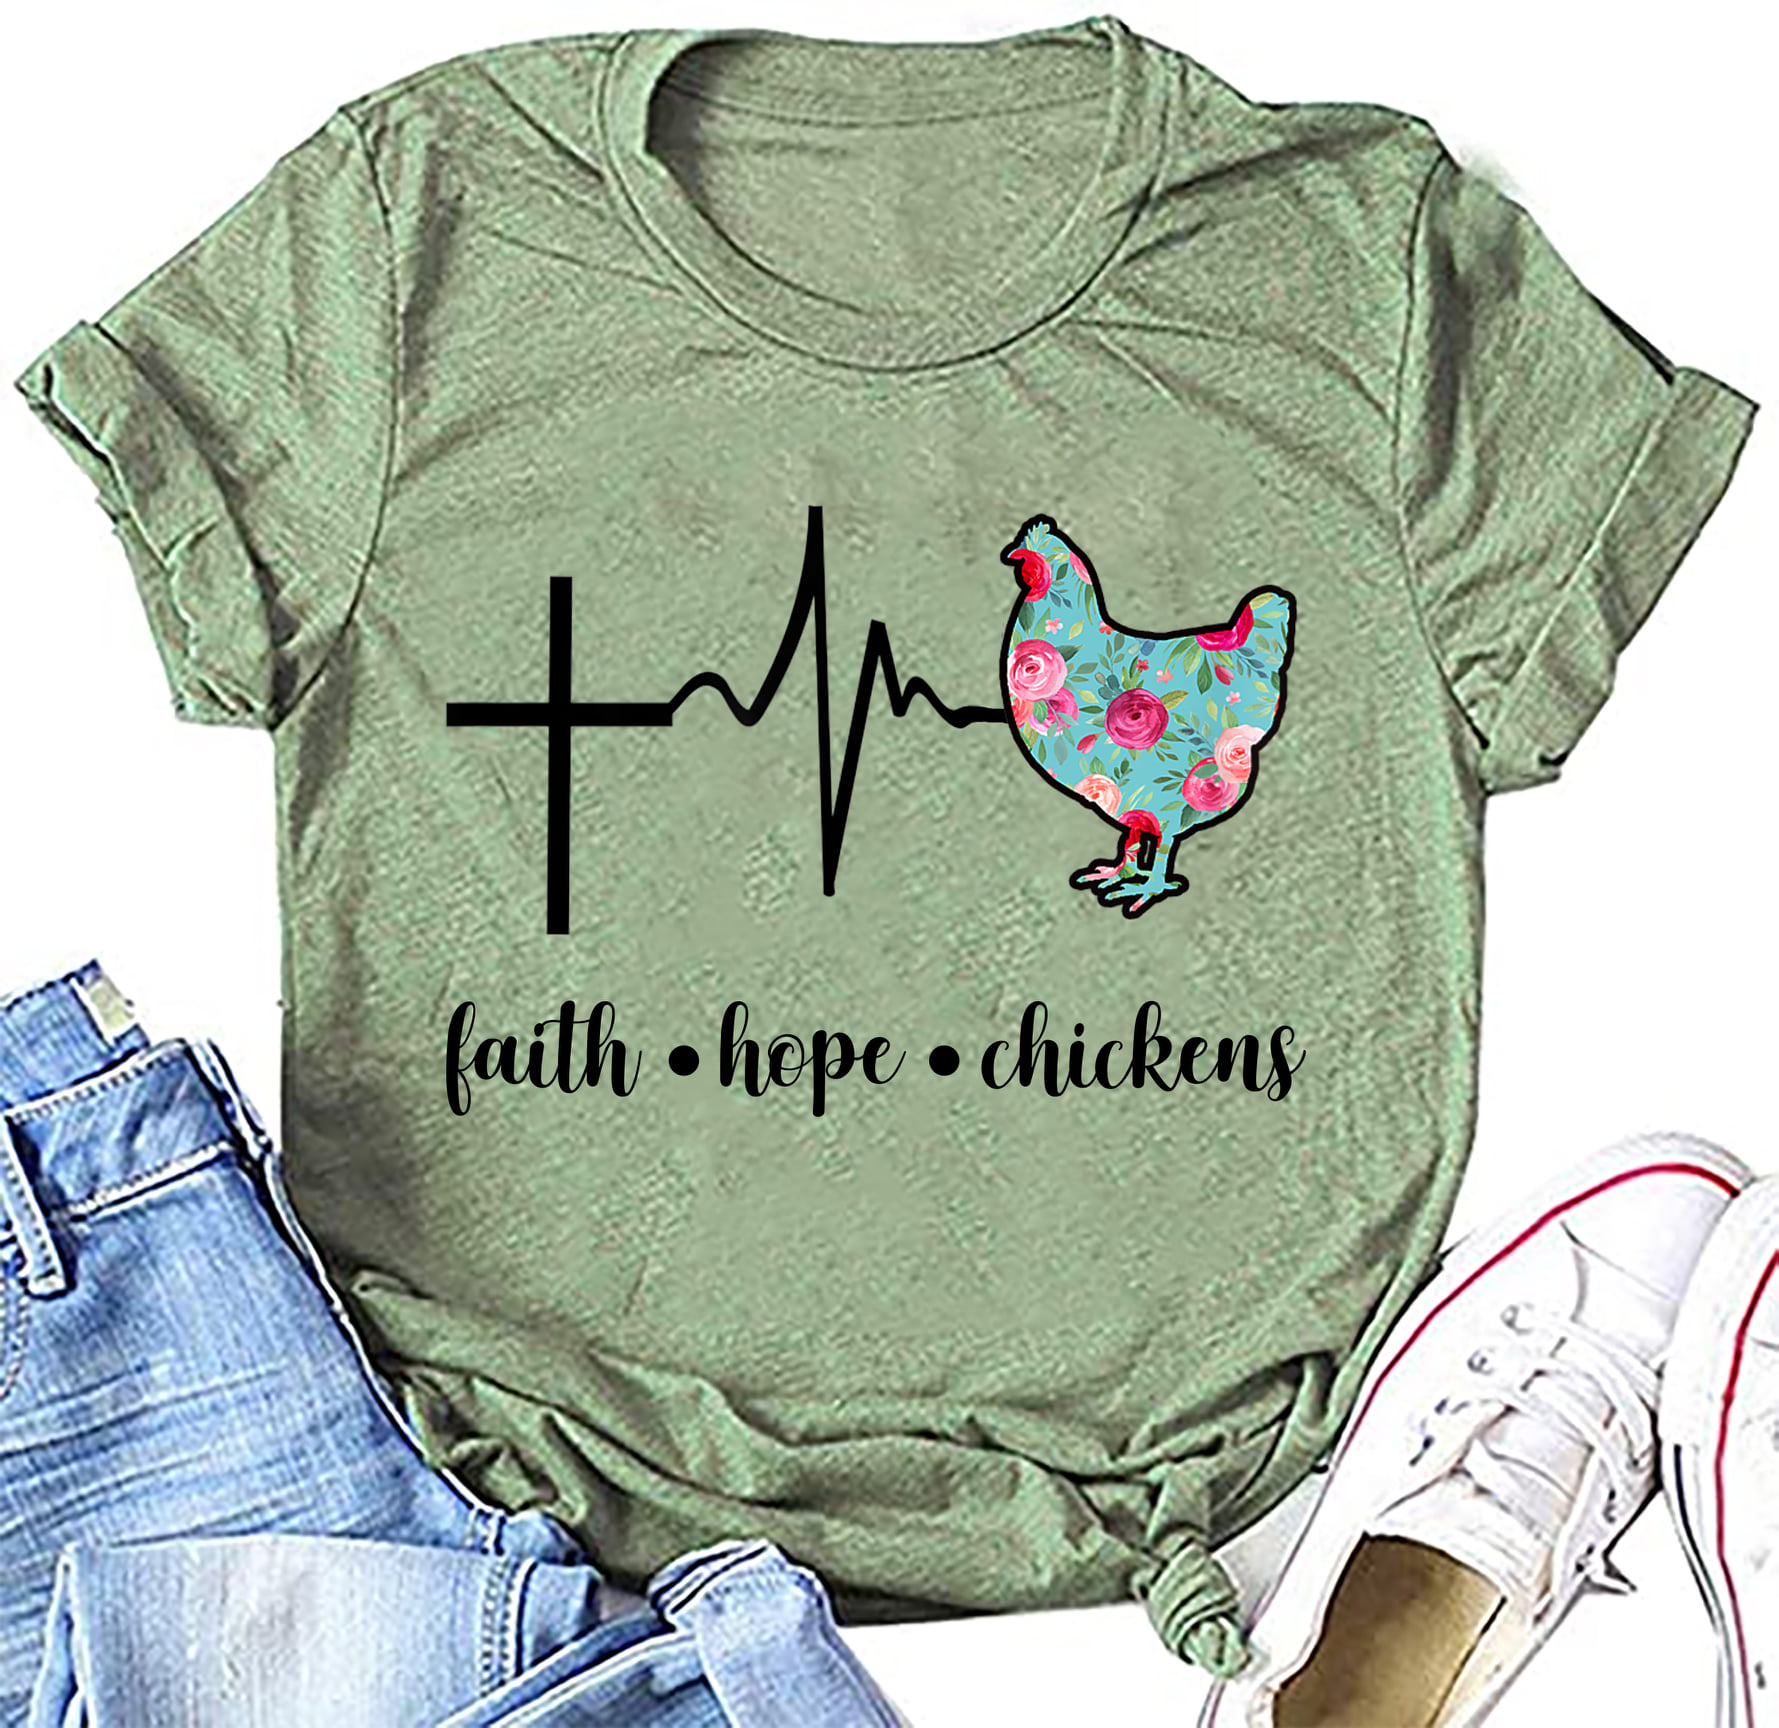 God's Cross And Chicken – Faith, hope, chicken